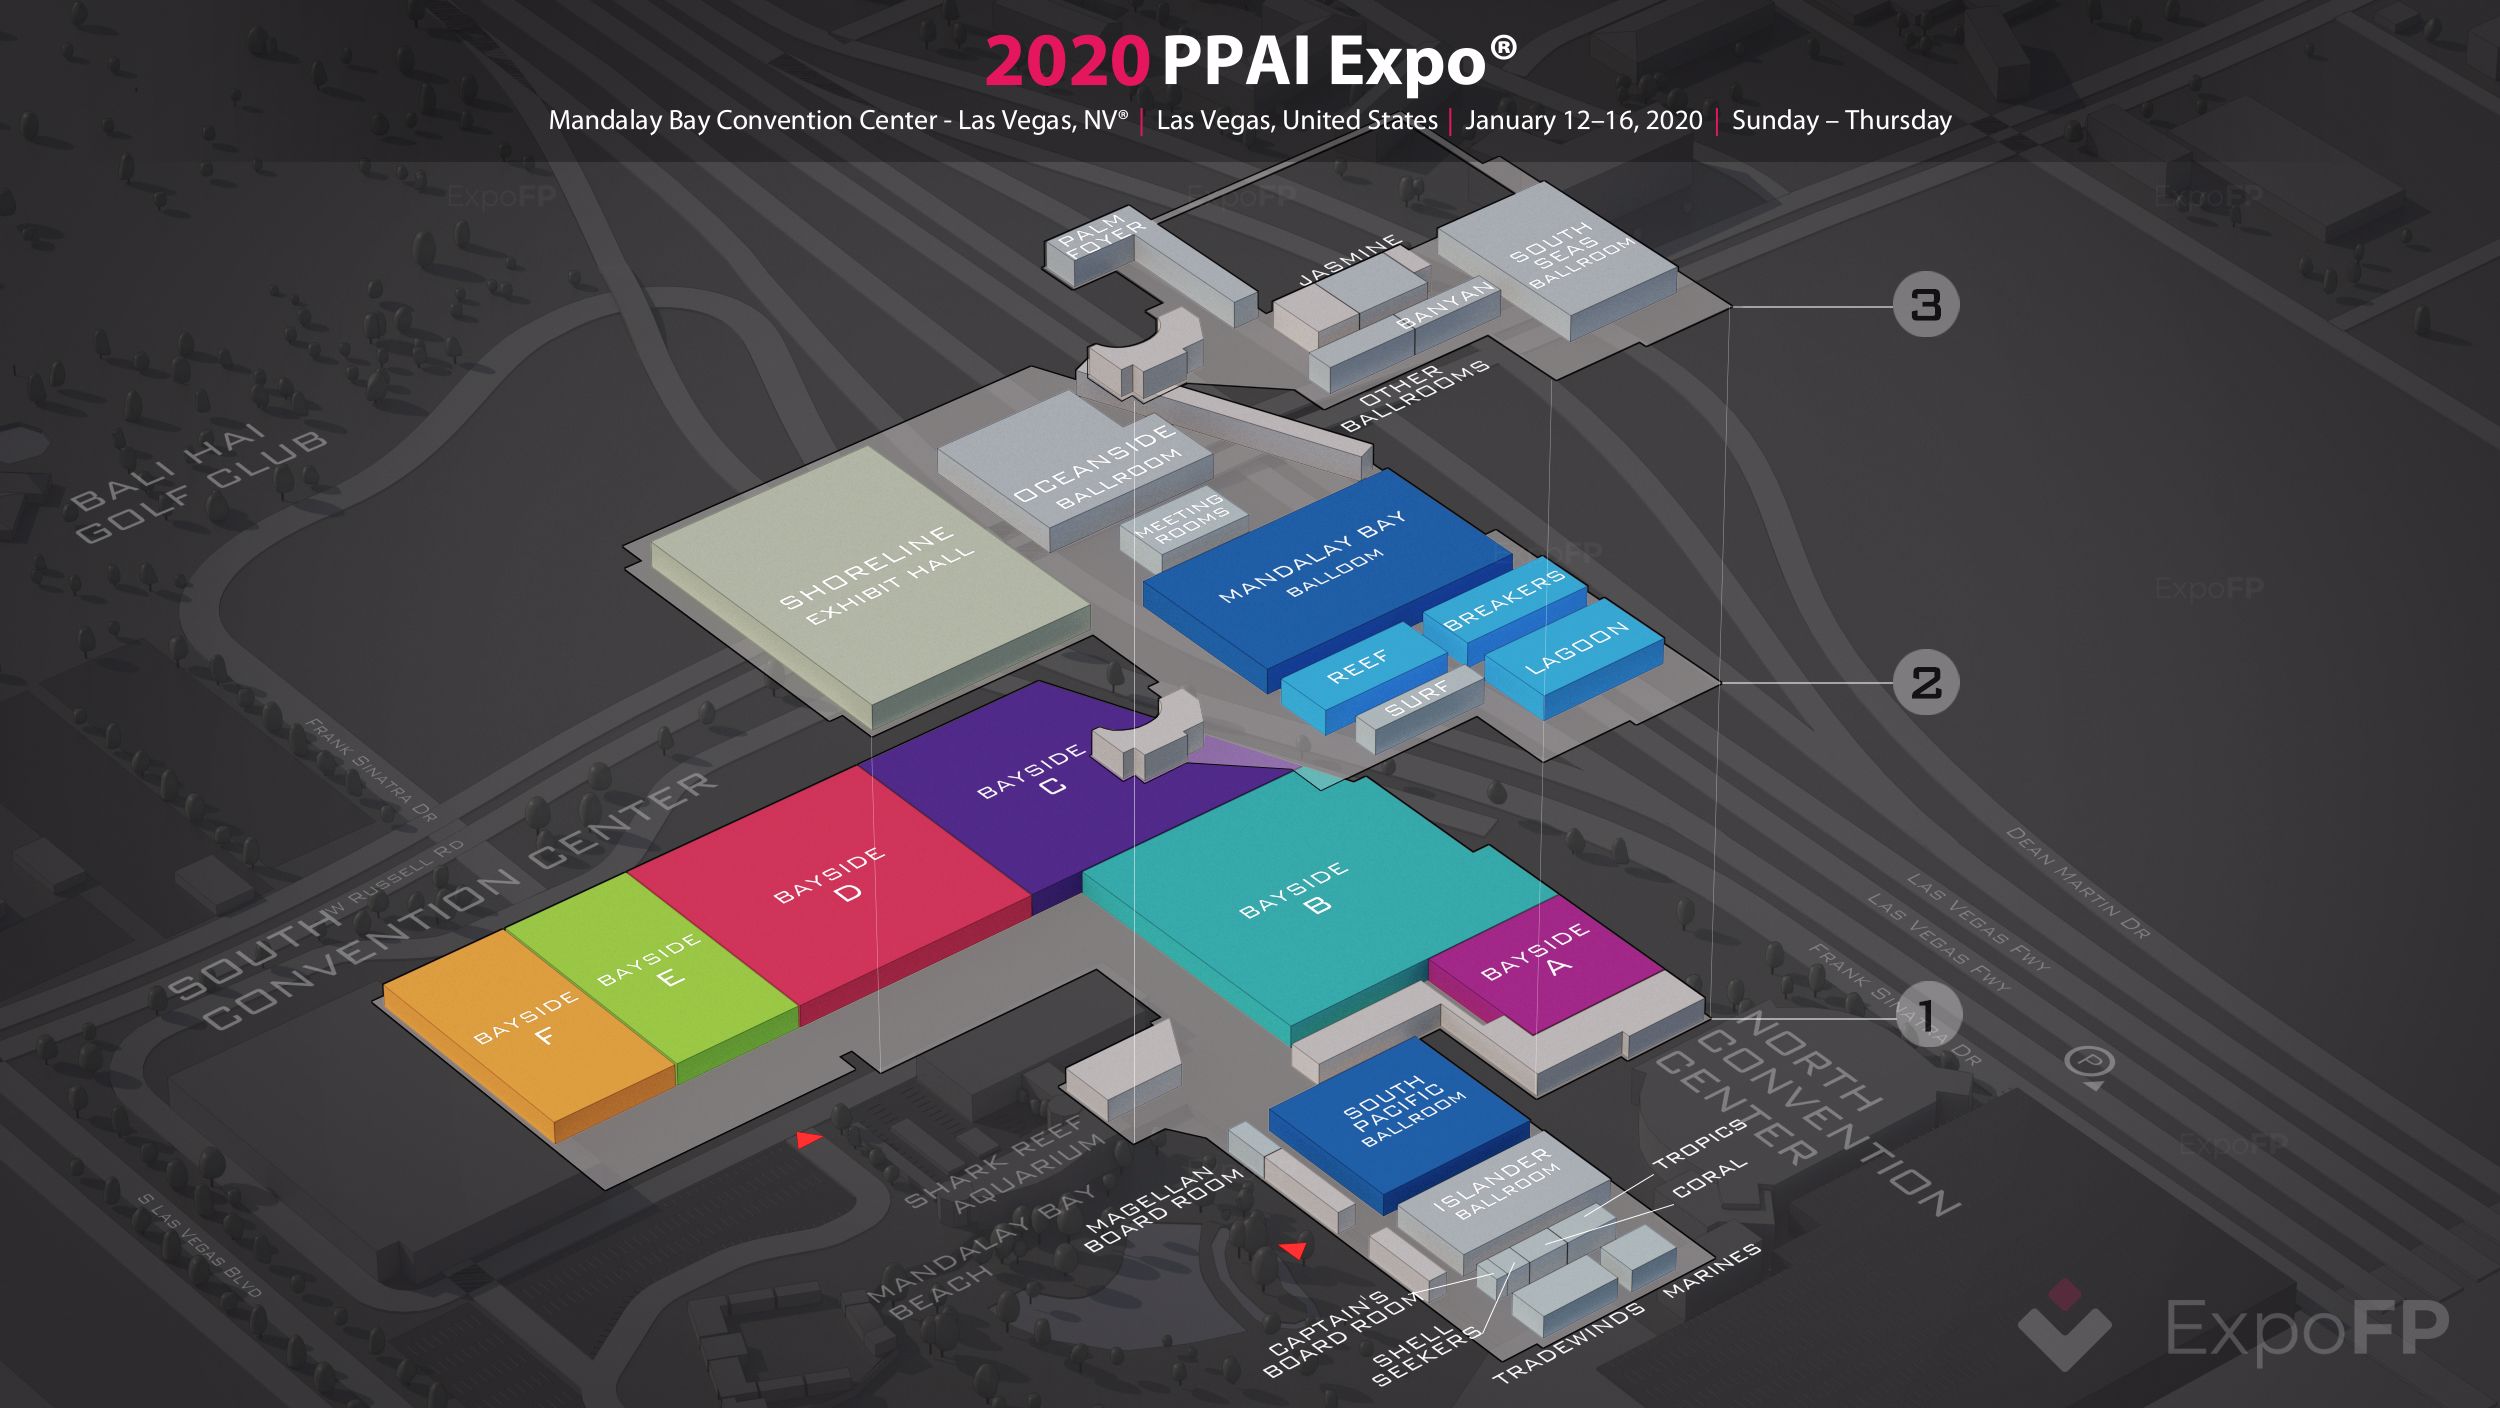 PPAI Expo 2020 in Mandalay Bay Convention Center Las